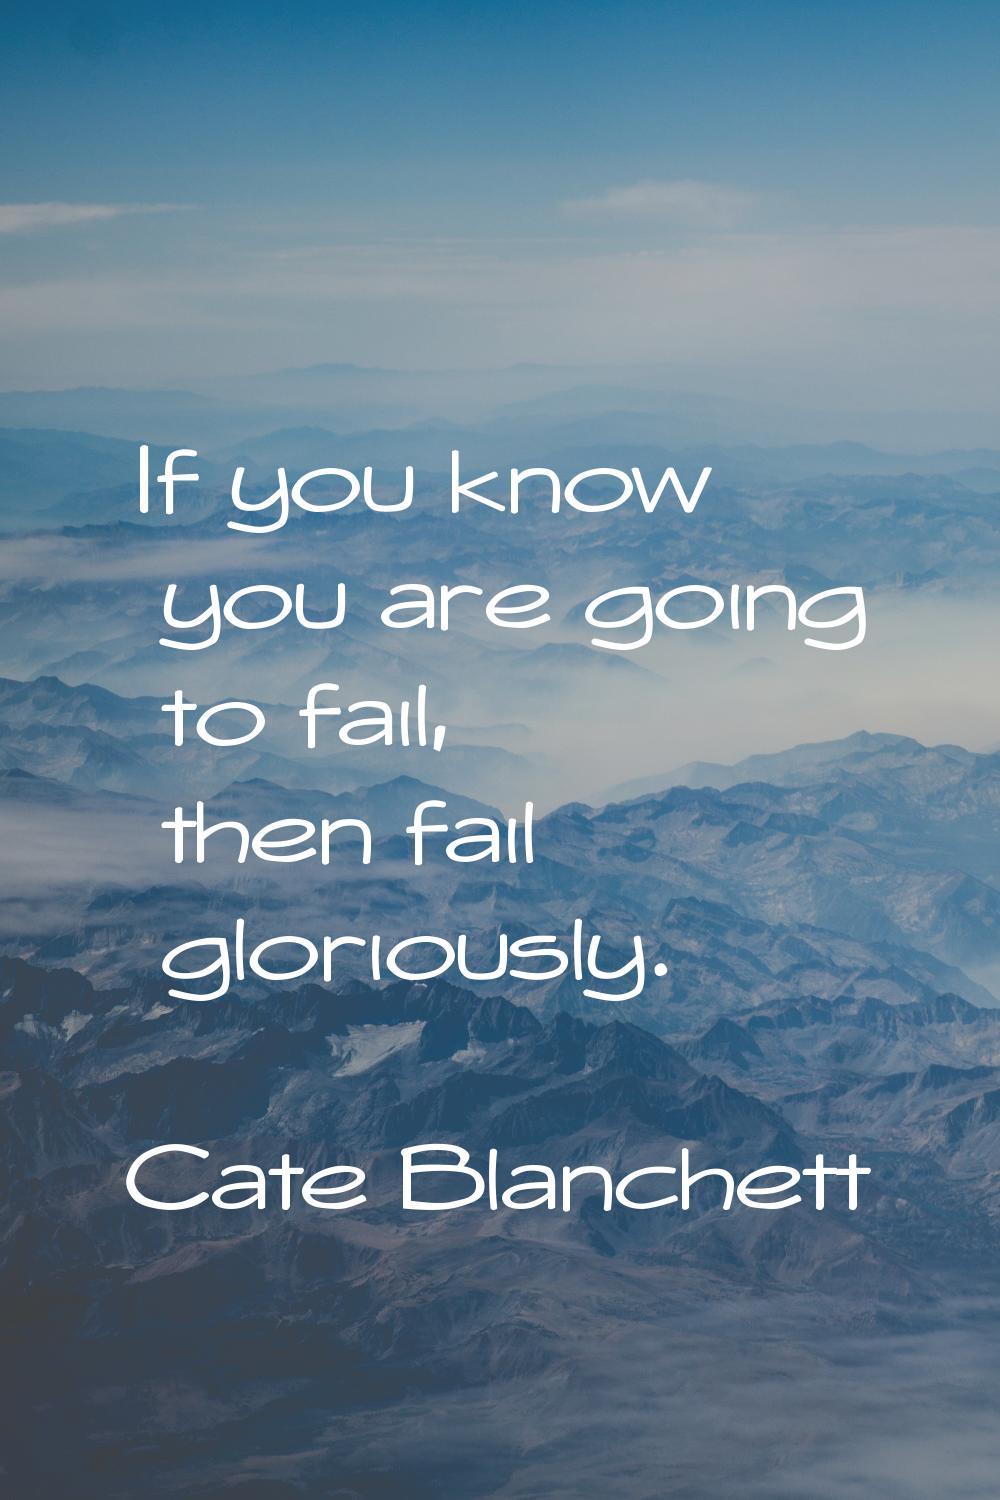 If you know you are going to fail, then fail gloriously.